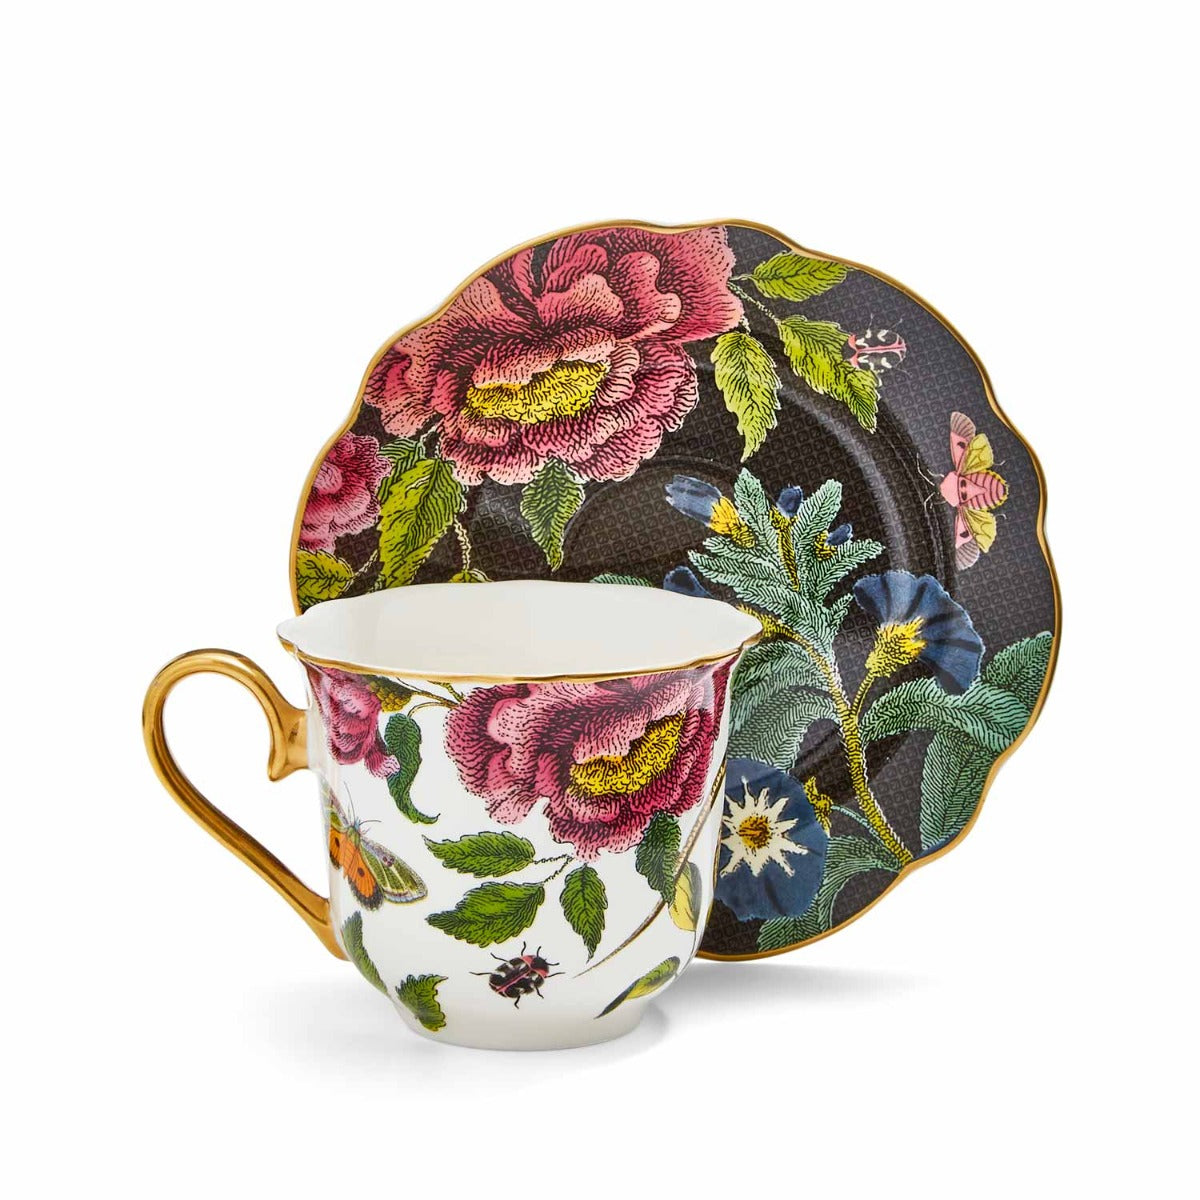 Creatures of Curiosity - Floral Serpent Teacup and Saucer - Magic Hour